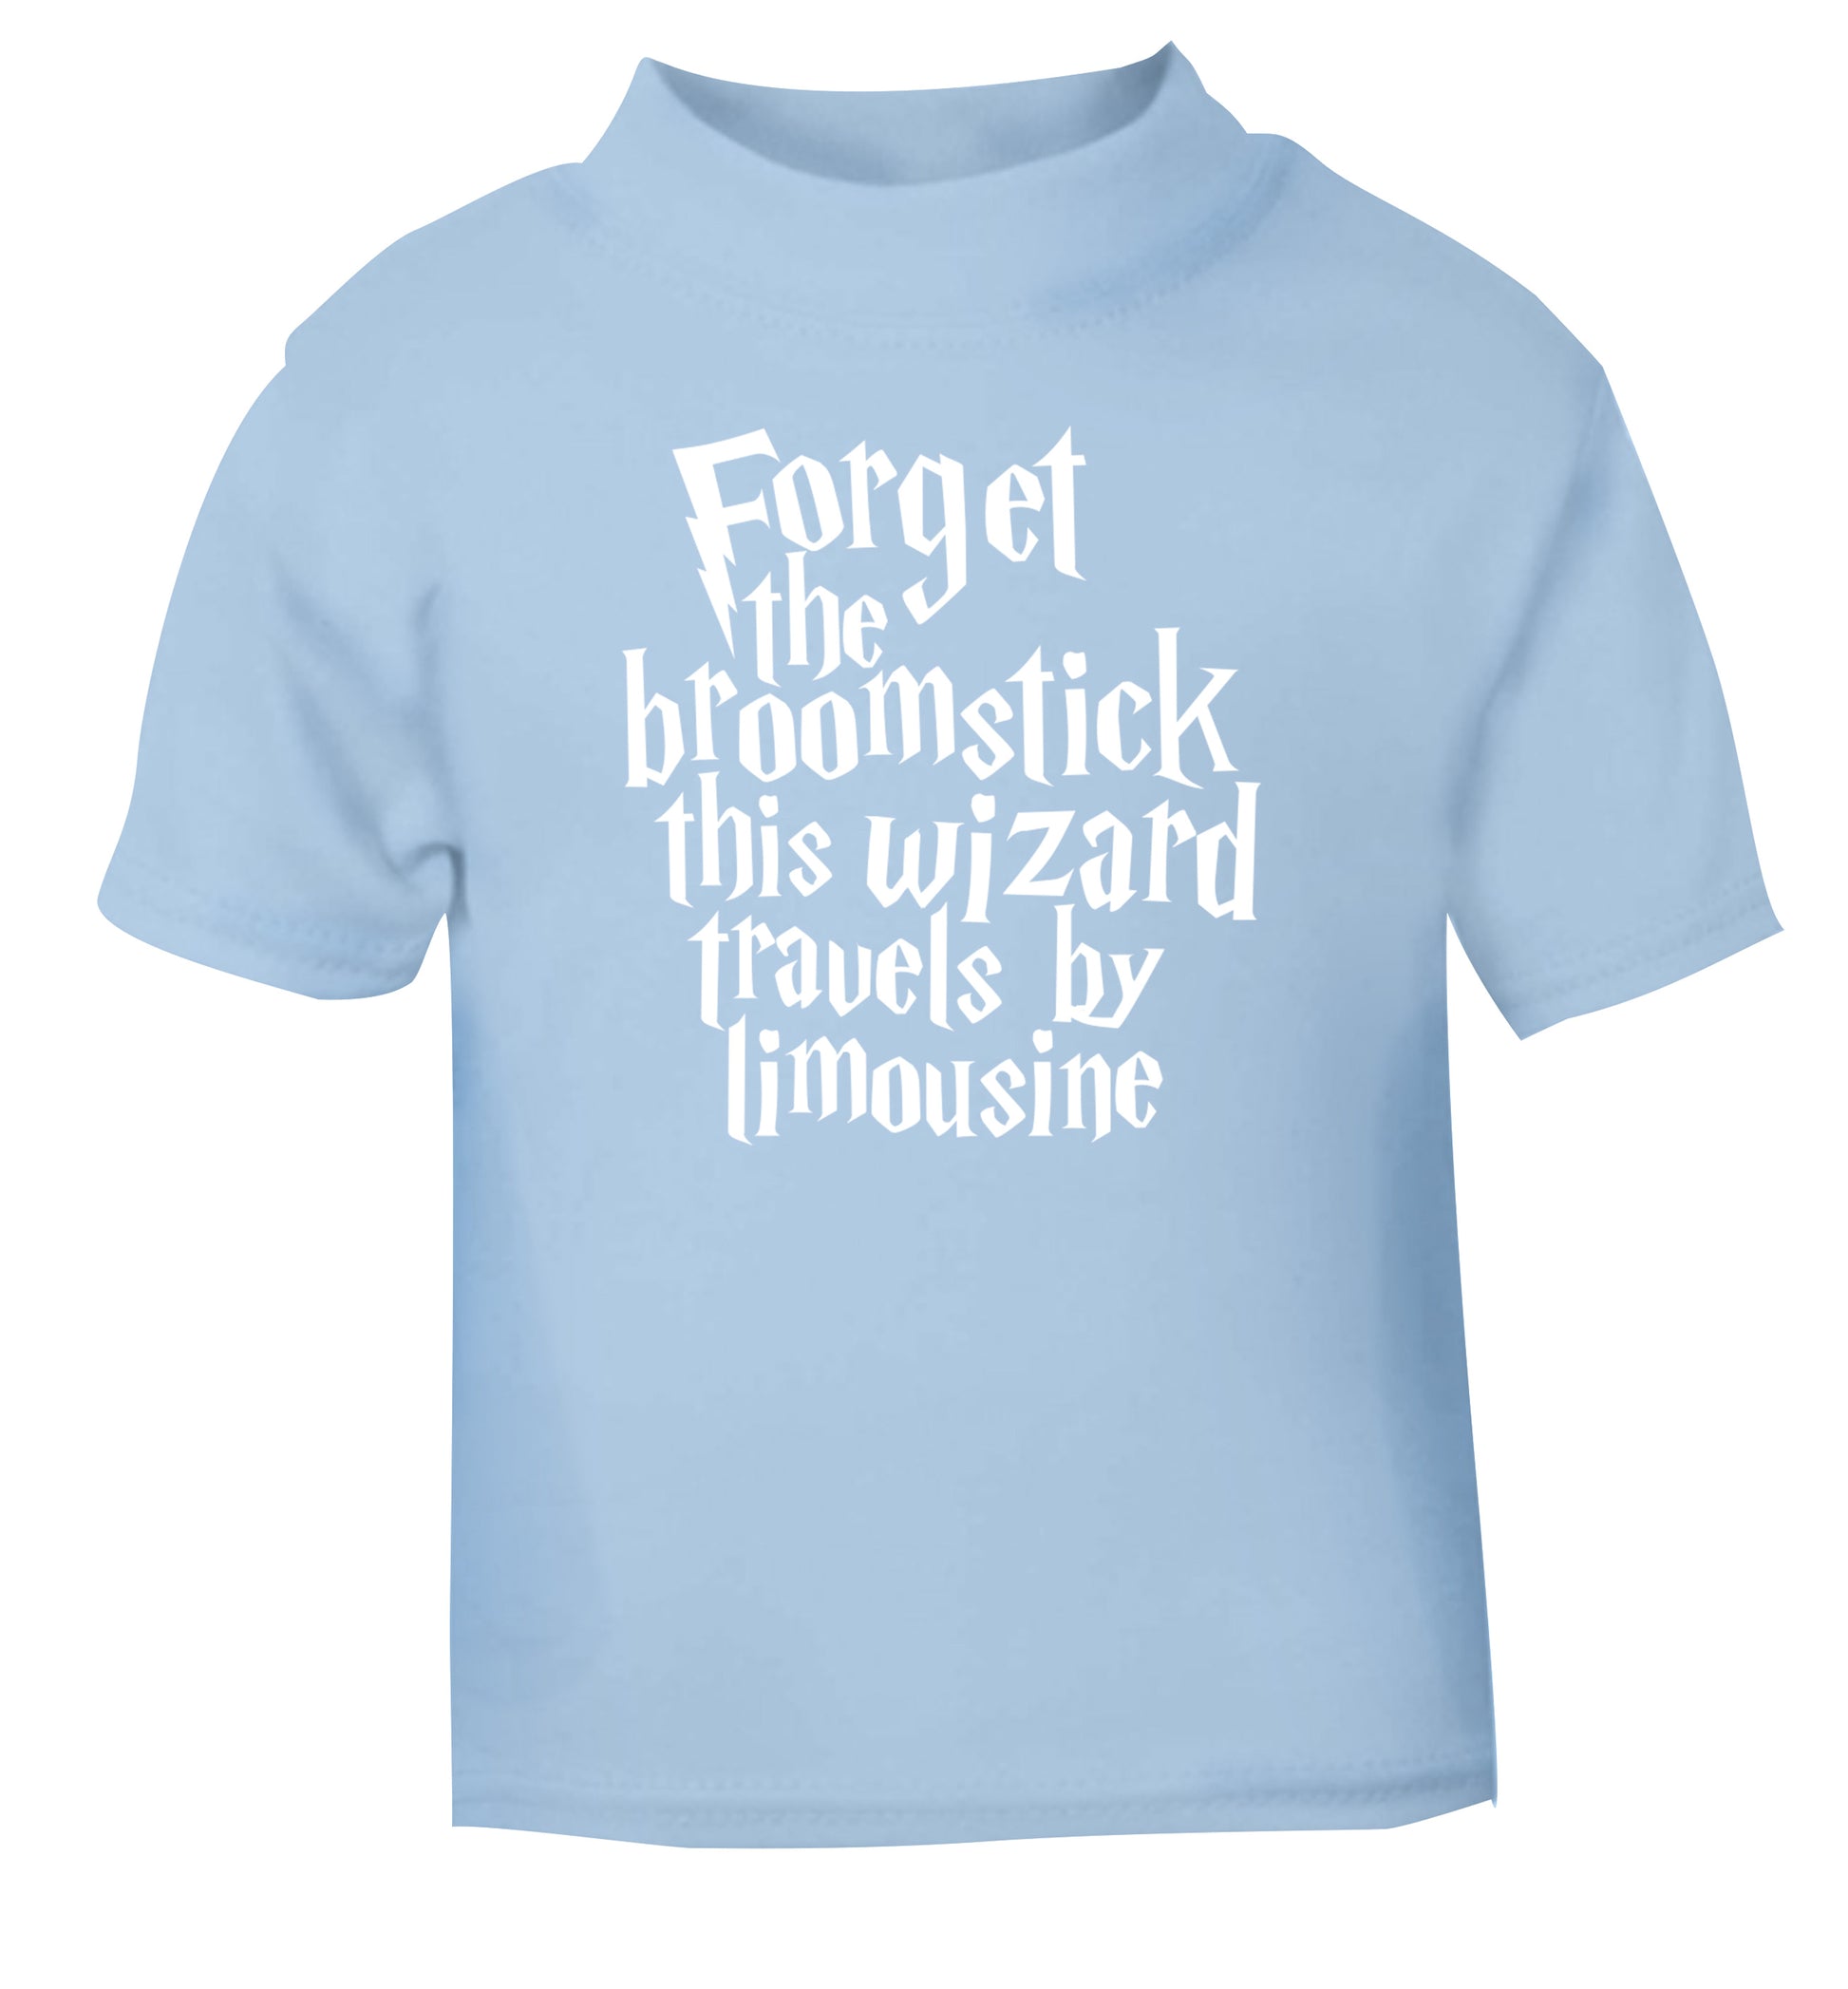 Forget the broomstick this wizard travels by limousine light blue Baby Toddler Tshirt 2 Years